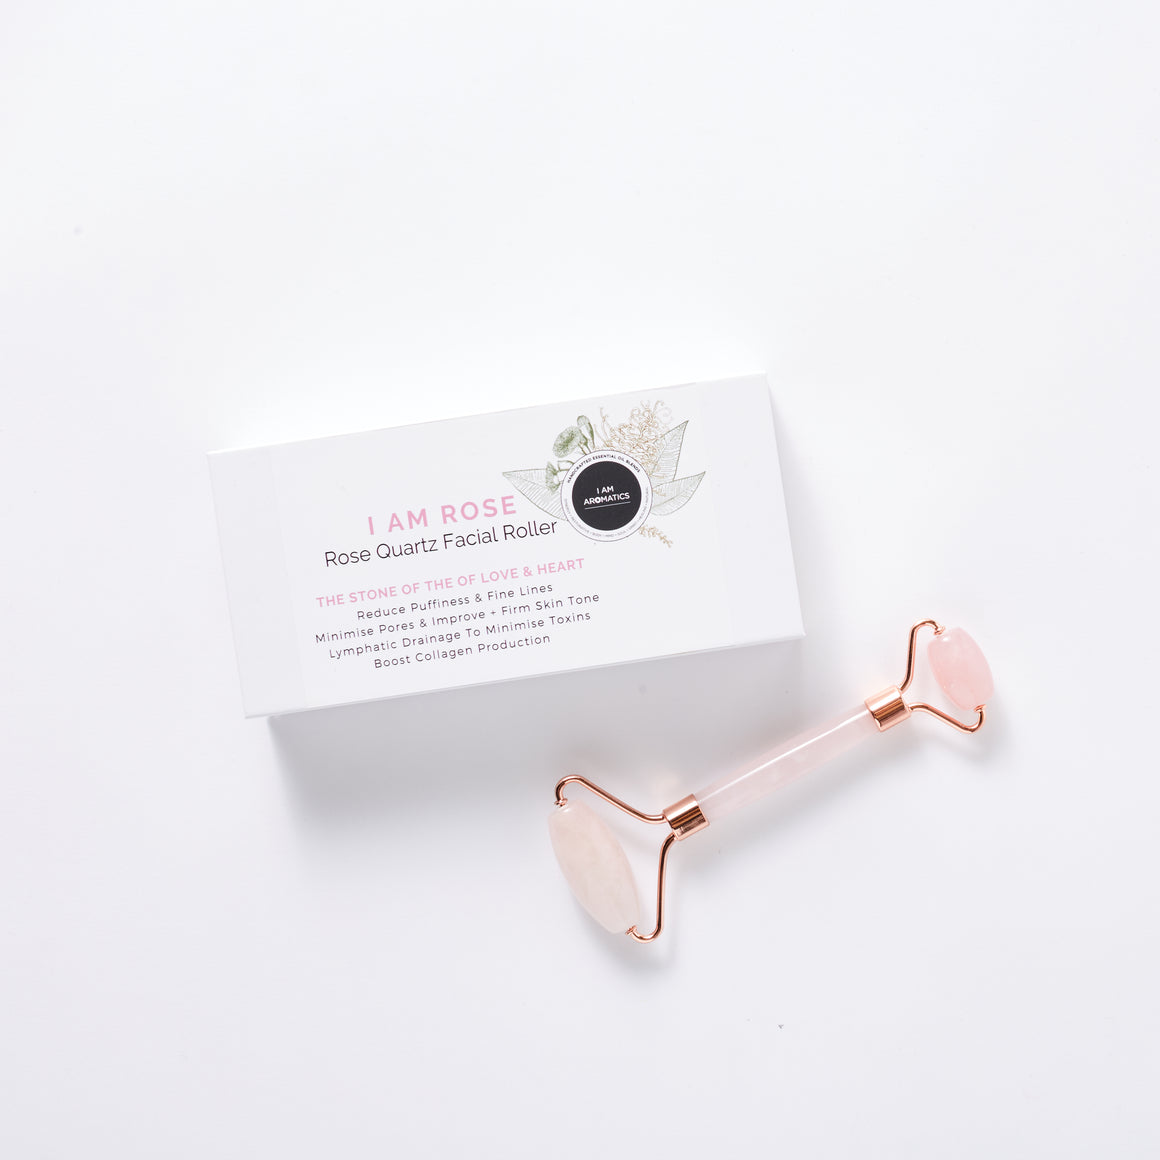 white packaging rectangle box with lablel botanical logo, black and pink font. Rose qartz facial roller laying flat